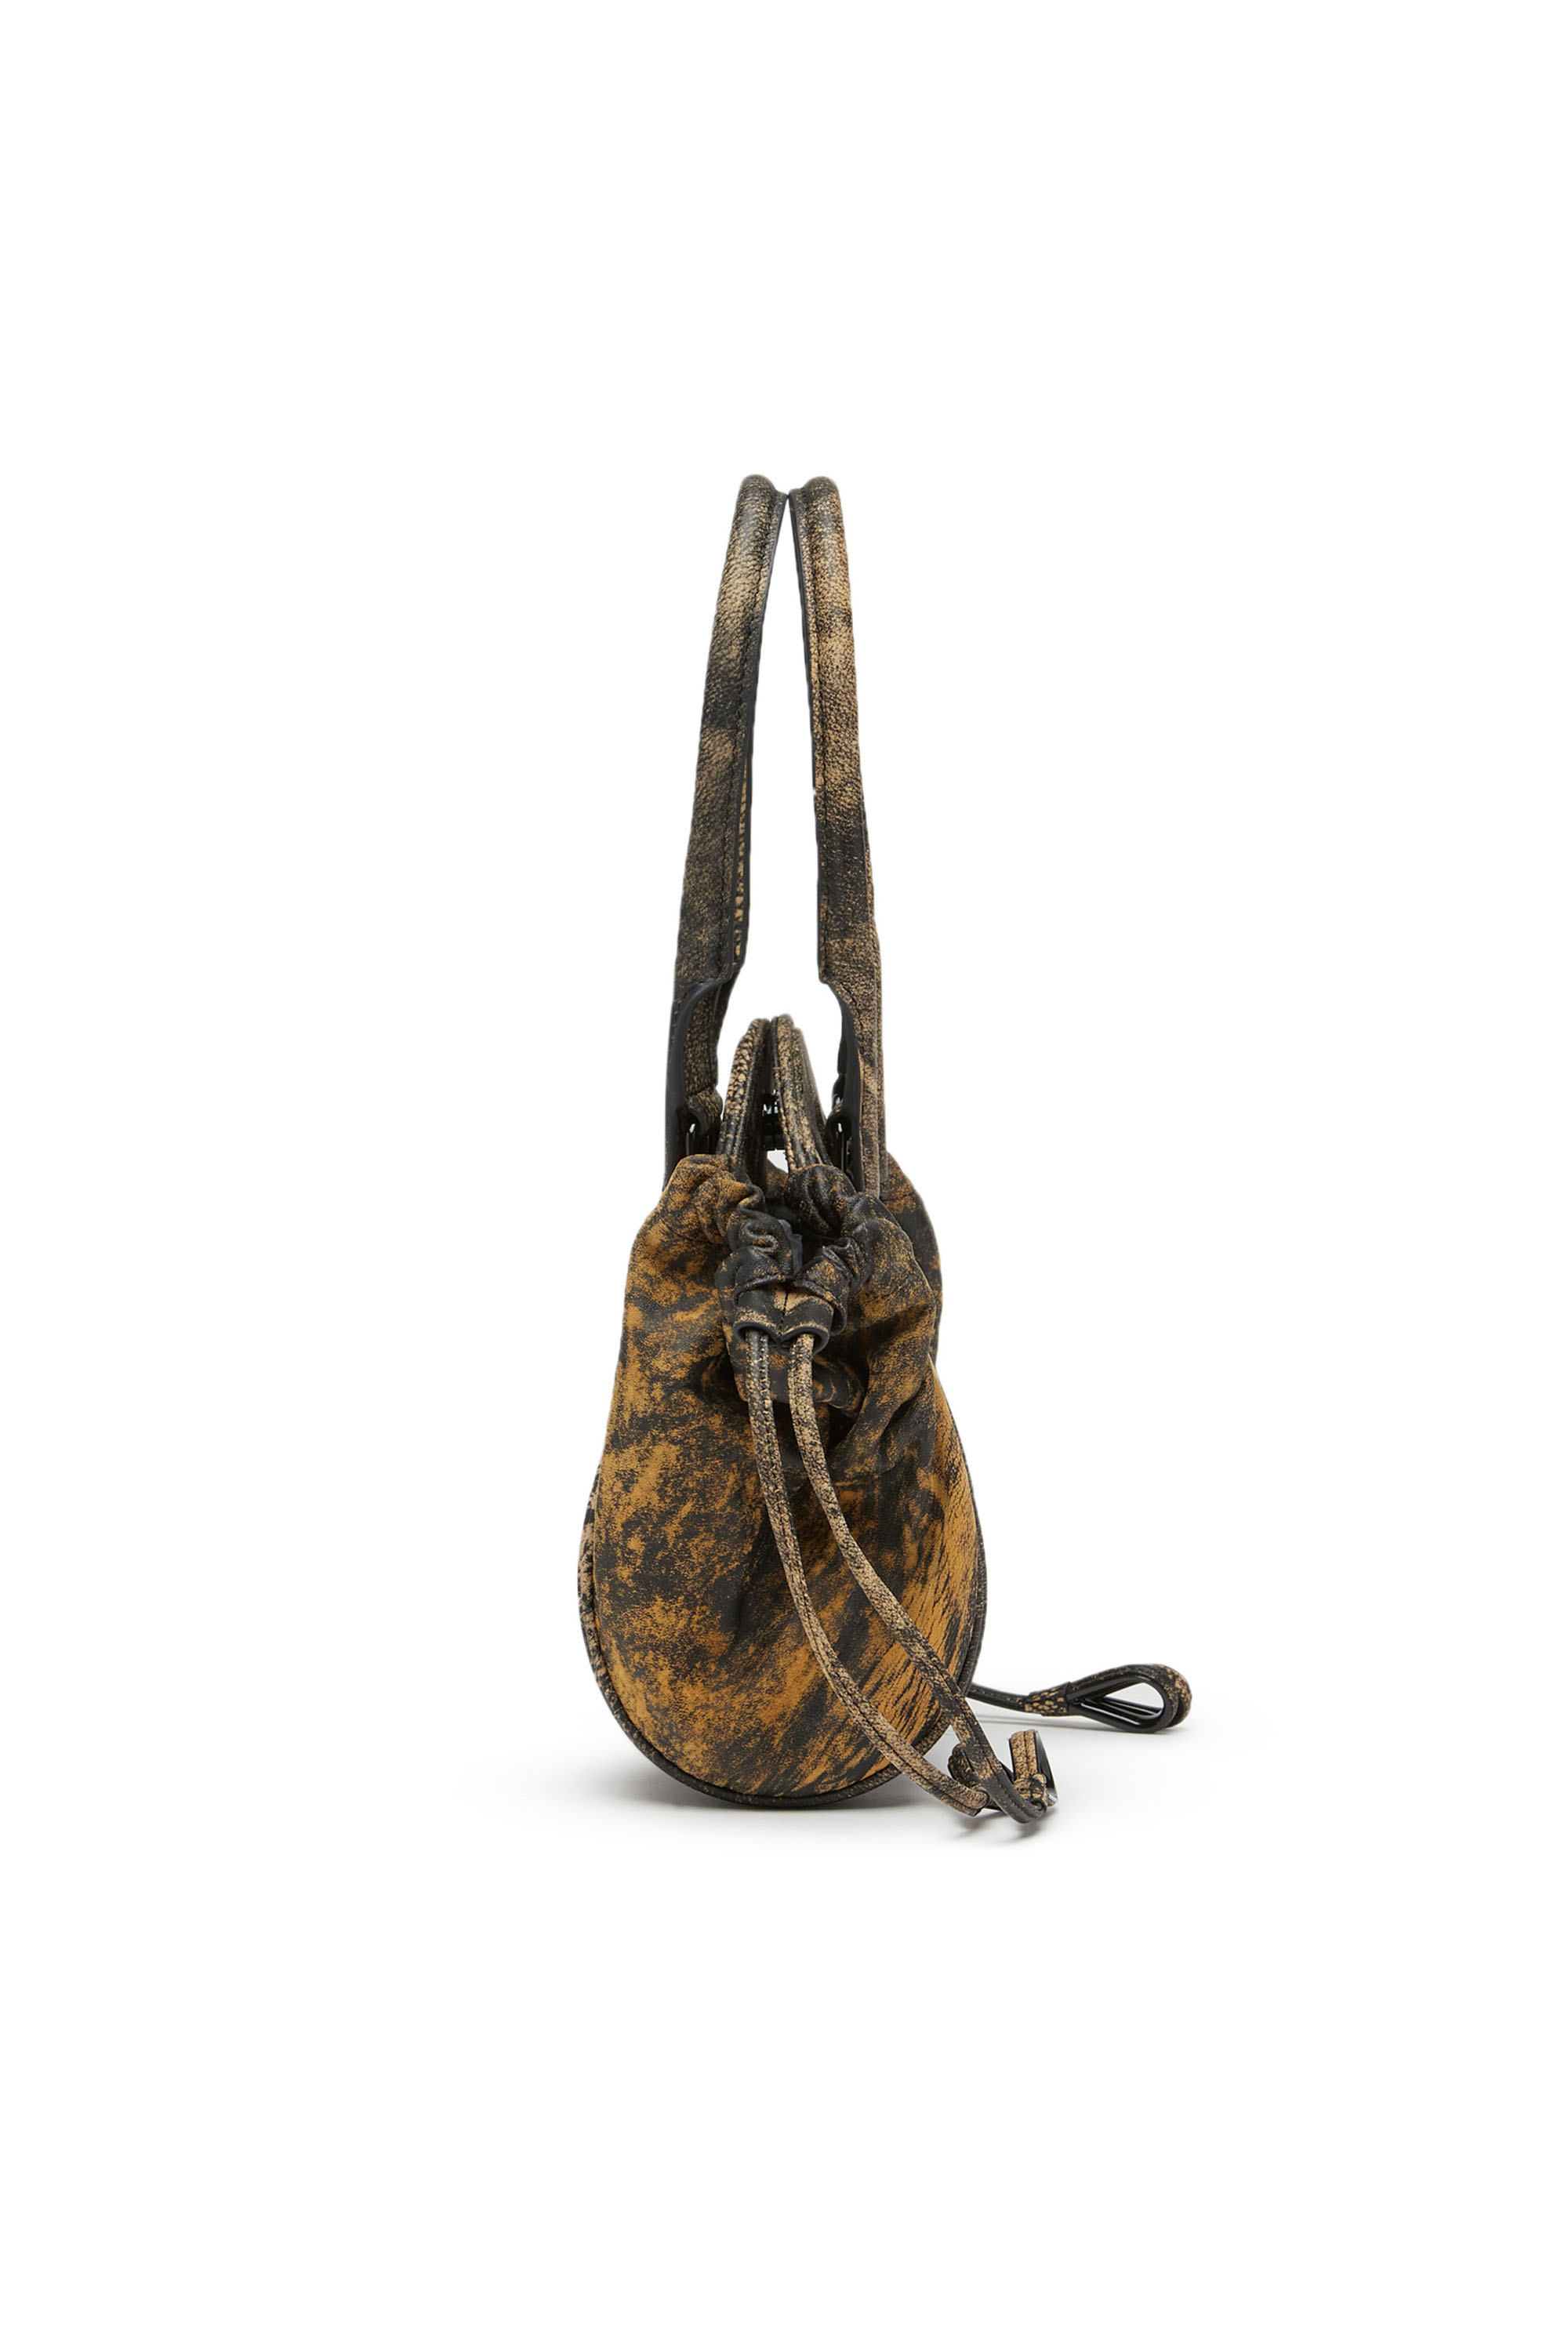 Diesel - 1DR-FOLD XS, Woman 1DR-Fold XS - Oval logo handbag in marbled leather in Brown - Image 3